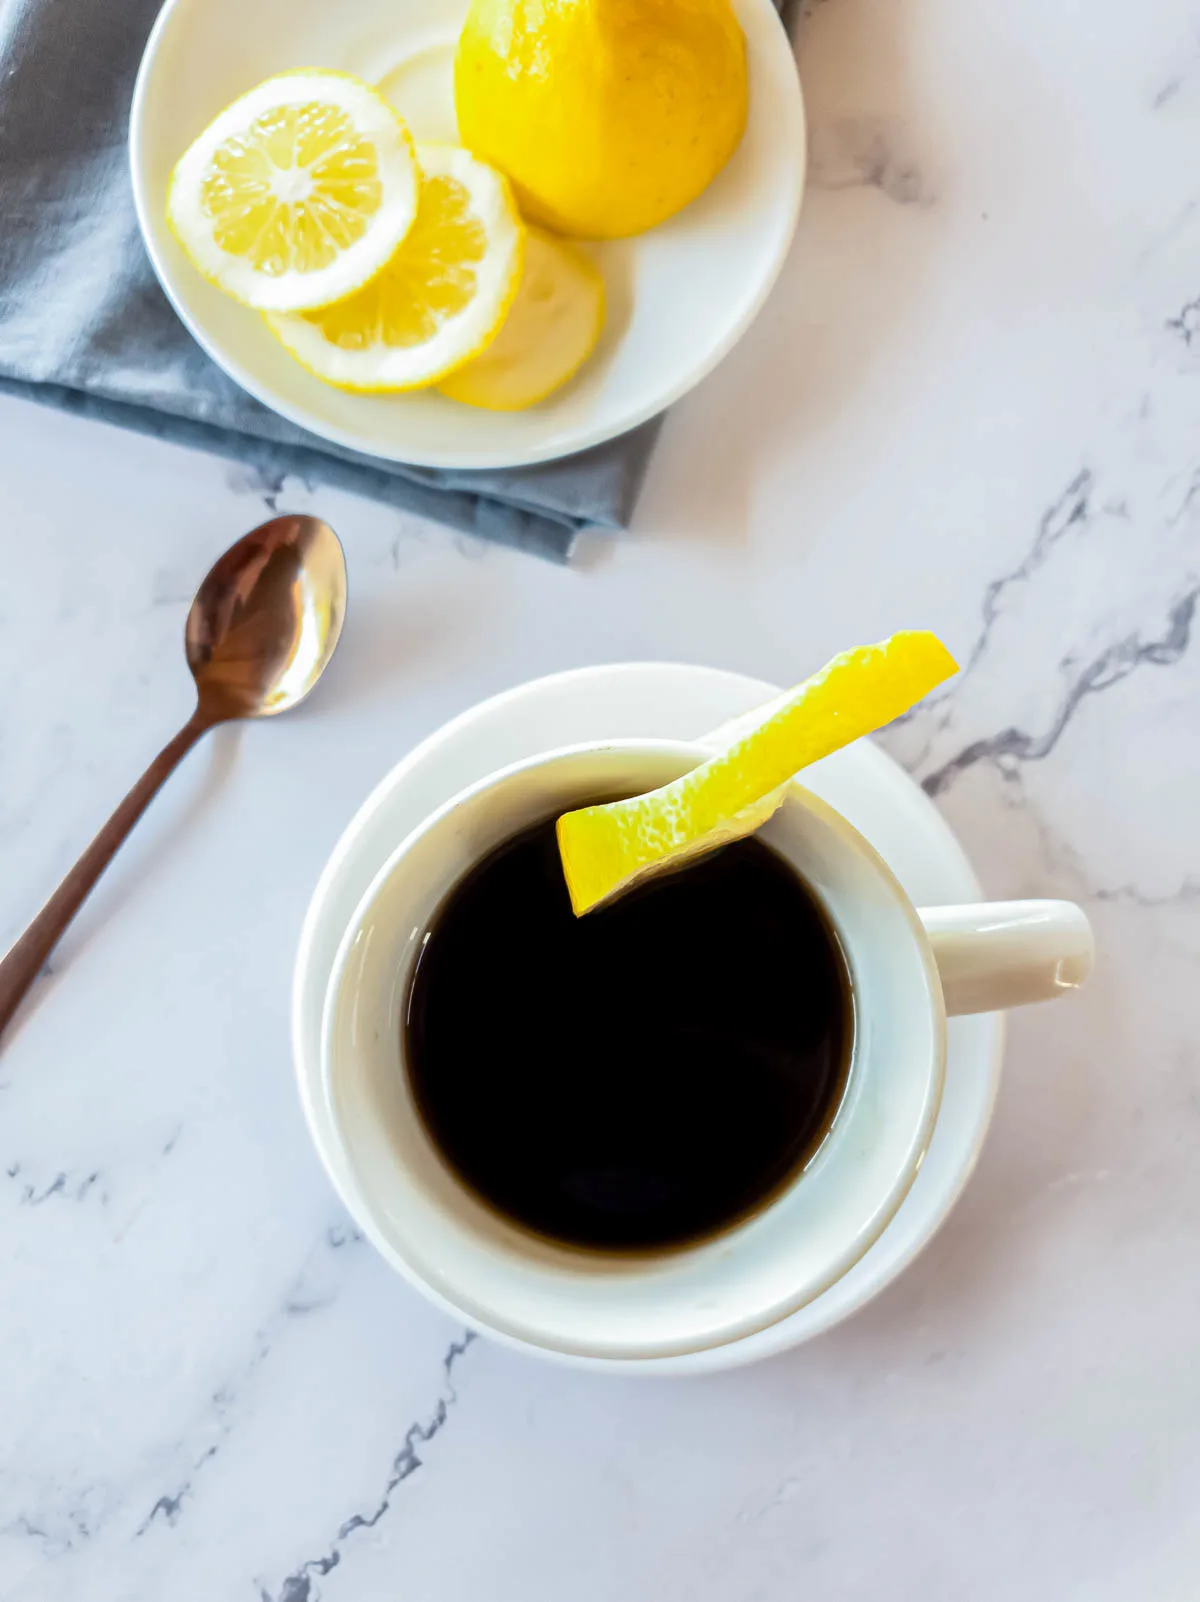 Overhead view of dark espresso with lemon, spoon, plate, and napkin.